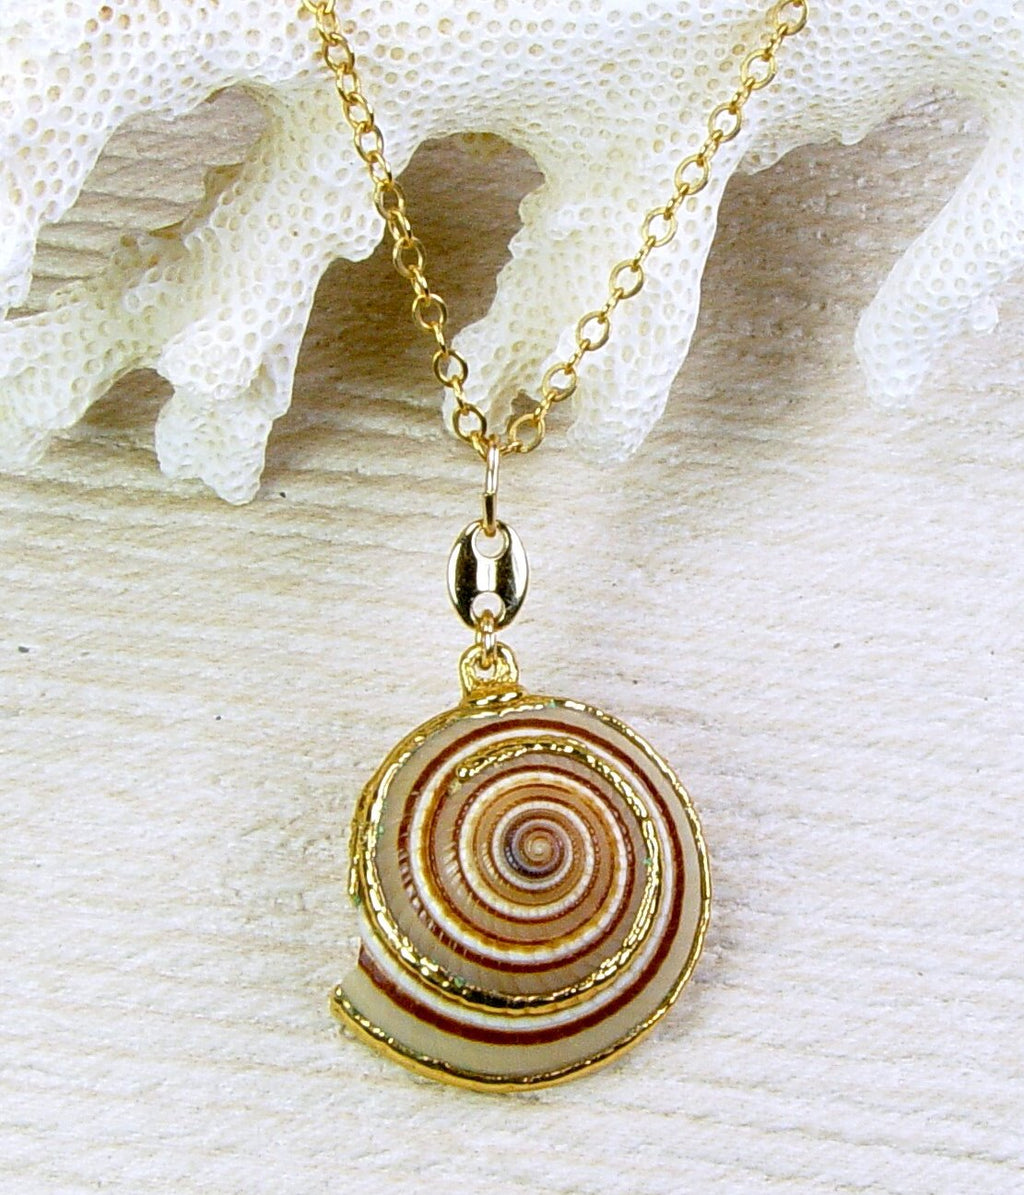 Buy Necklace With Real Resin Snail Shell, Real Animal, Real Insect Online  in India - Etsy